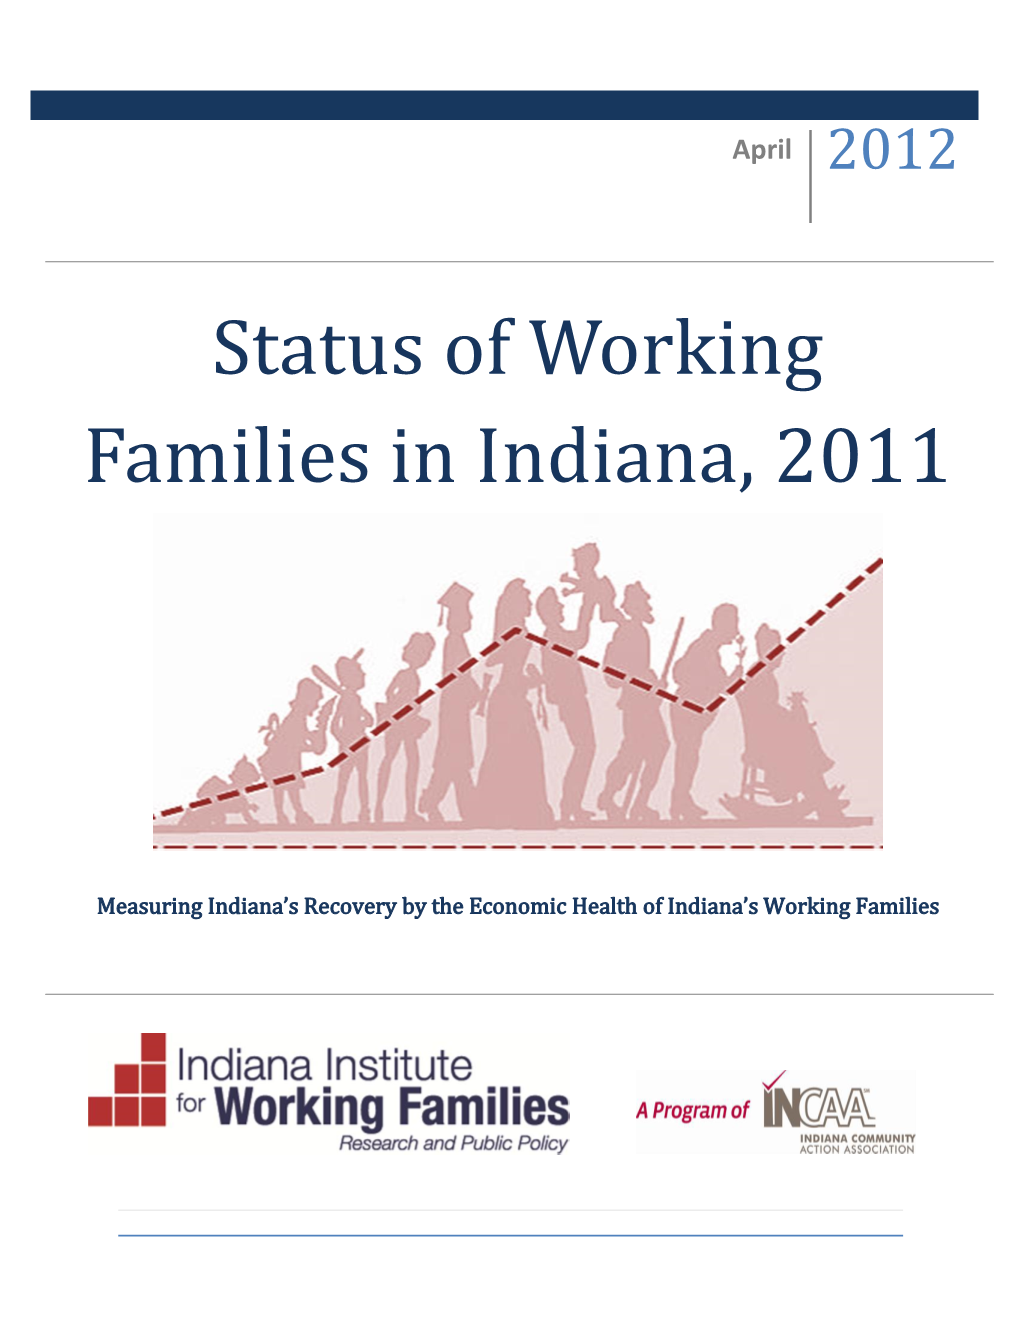 Status of Working Families in Indiana: 2011 Report